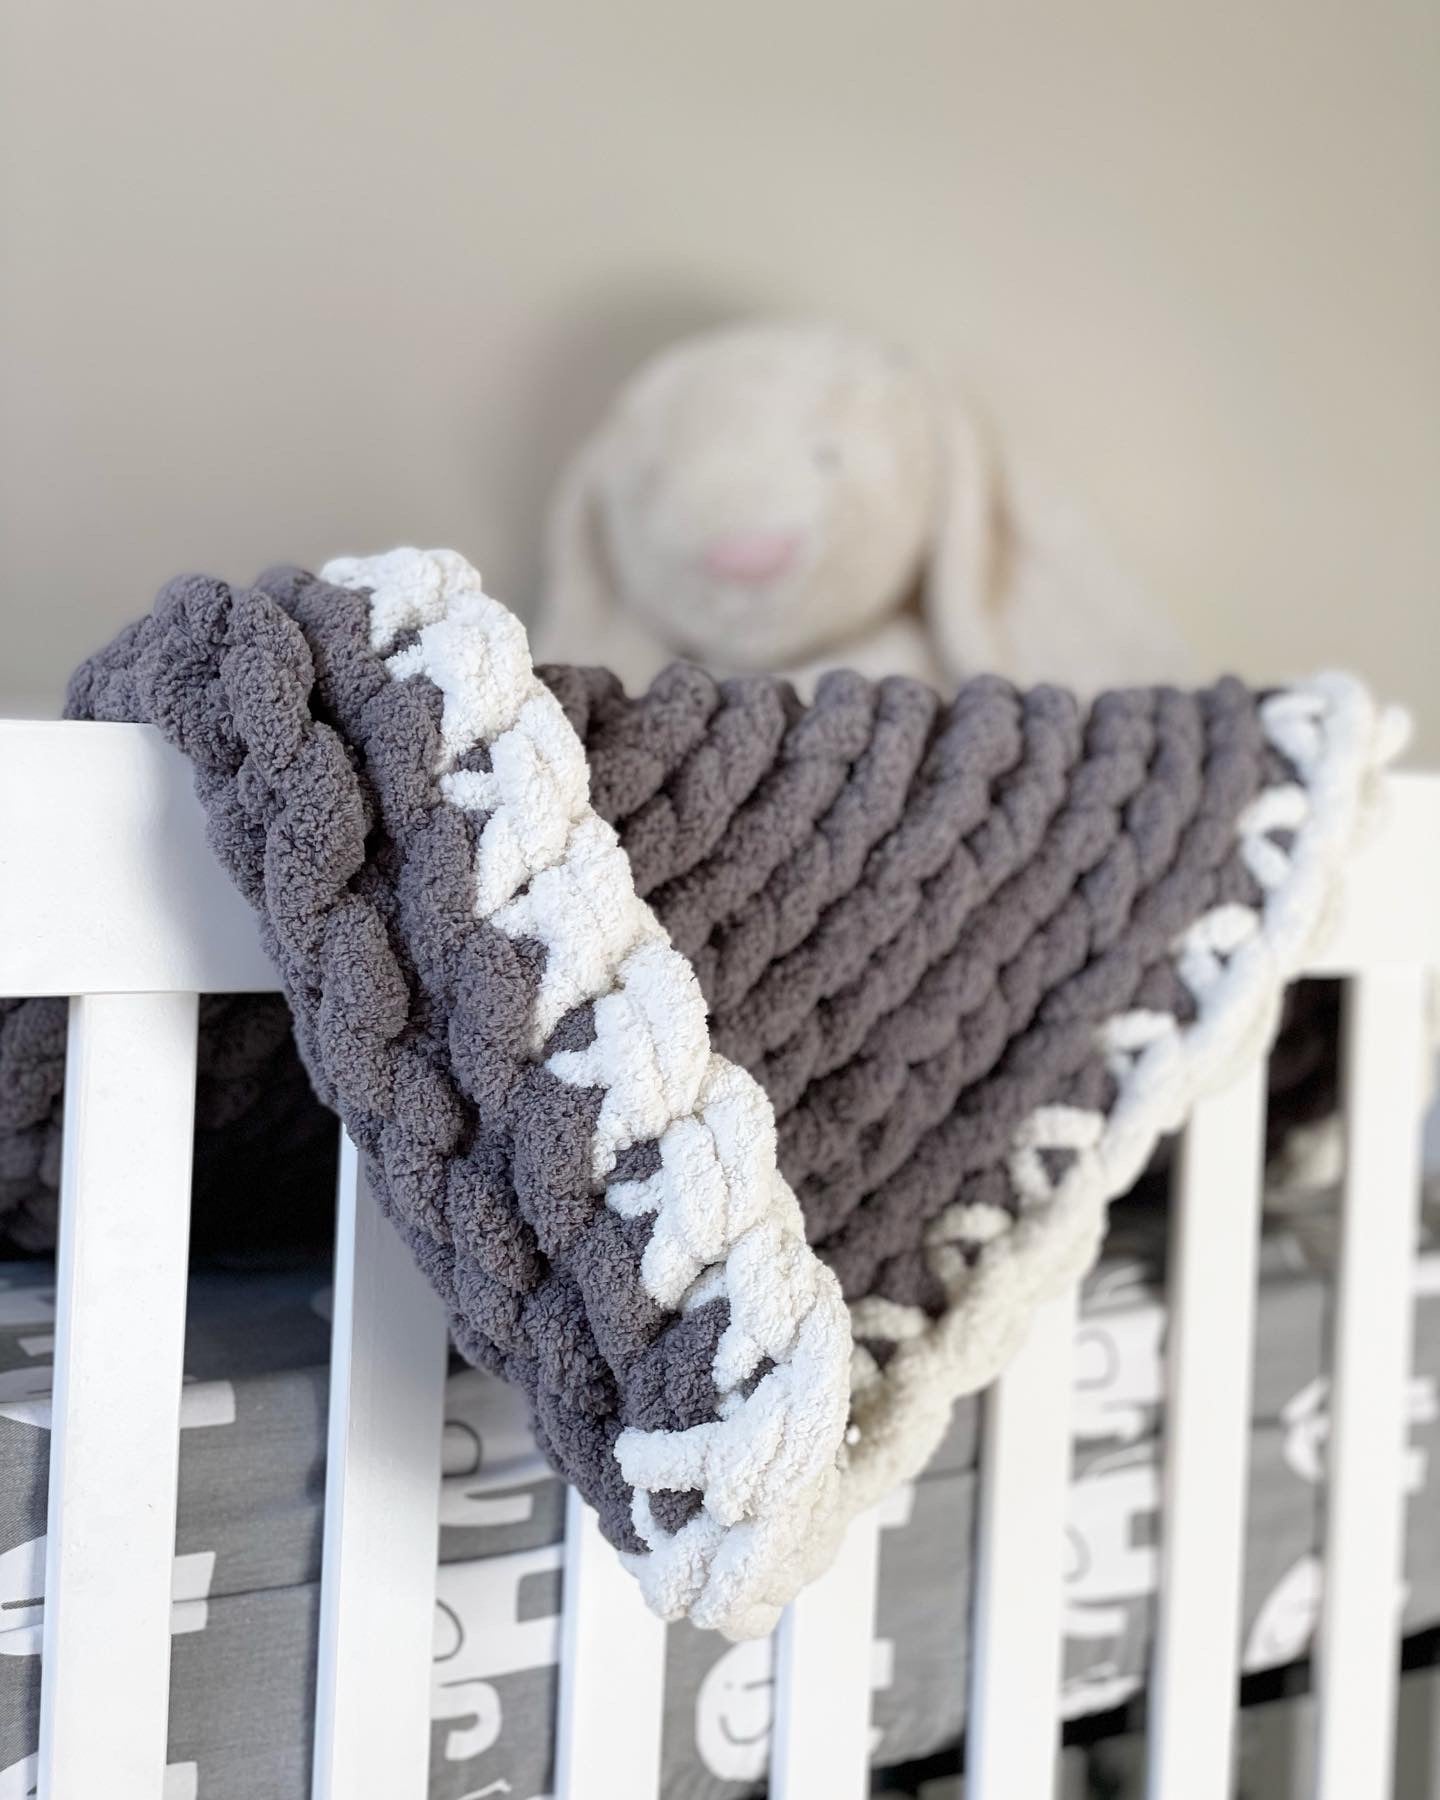 Healing Hand, Chunky Knit Baby Blankets - Stormy Grey with White Edge